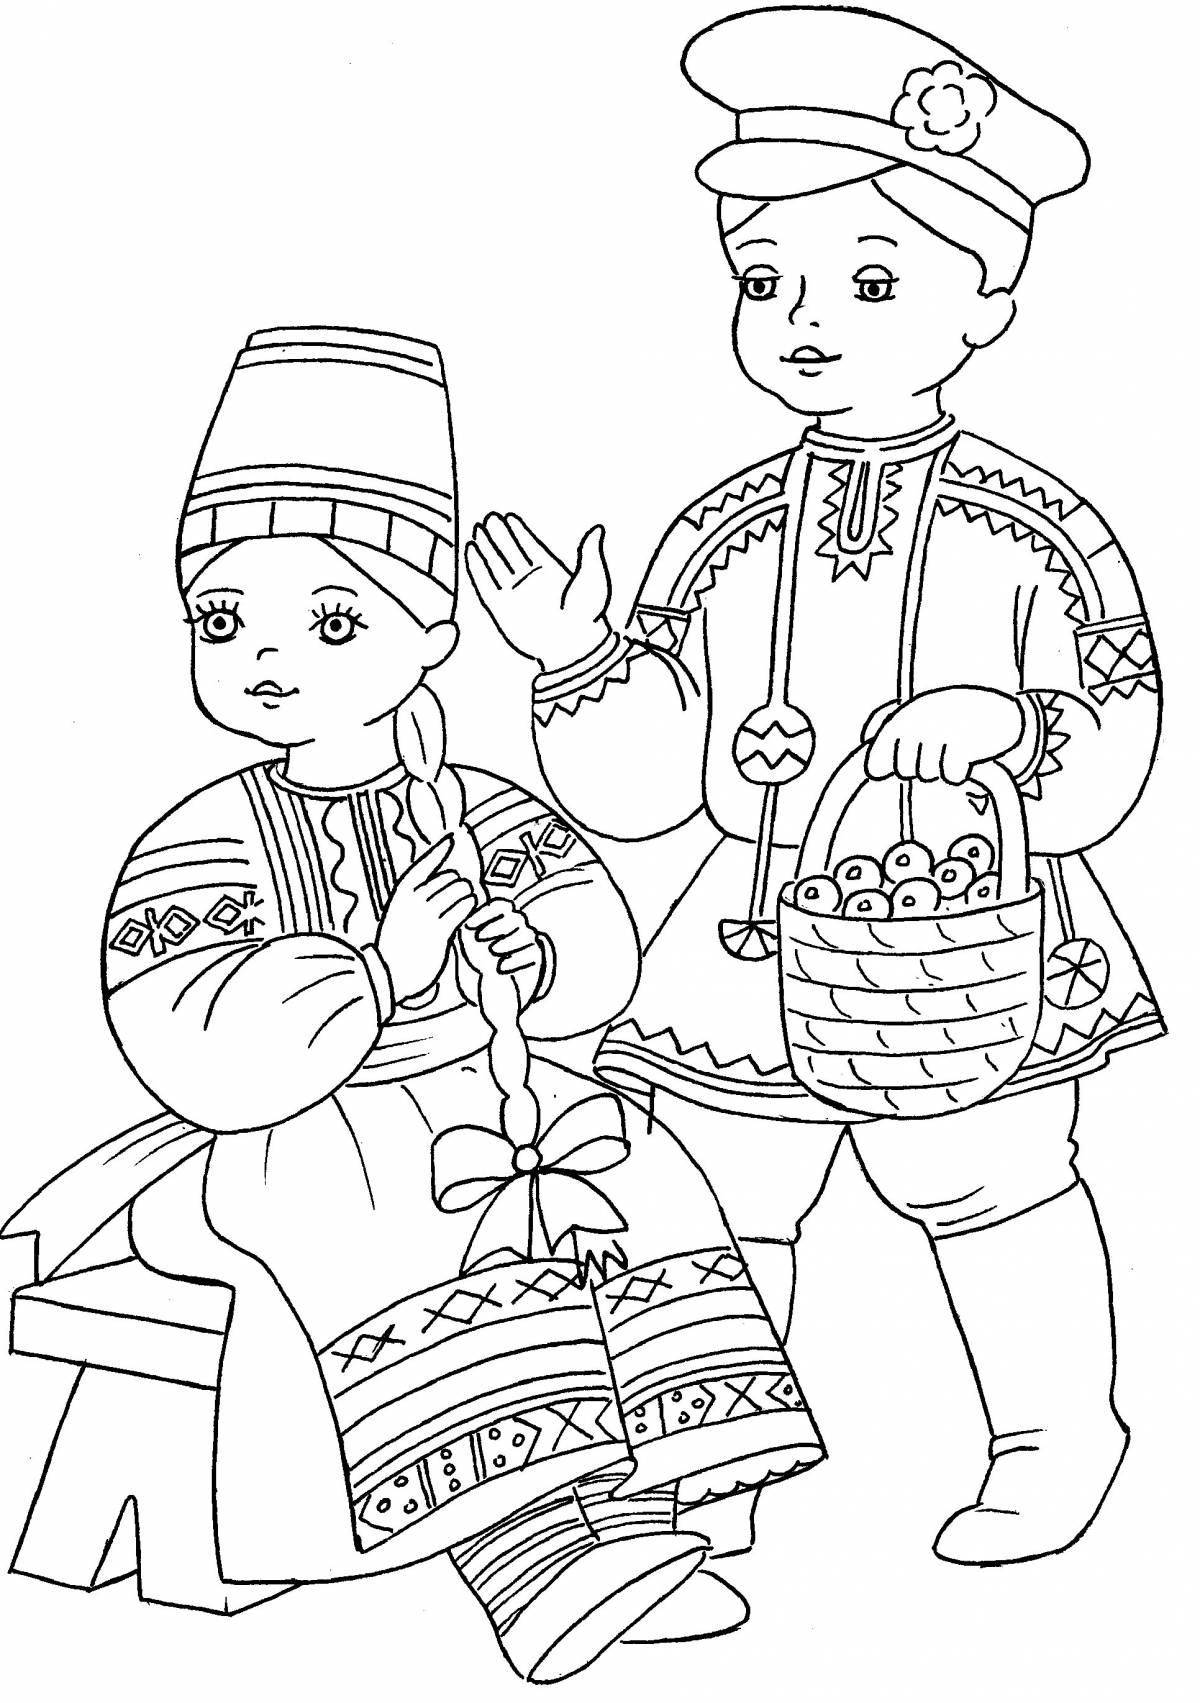 Charming Cossack coloring book